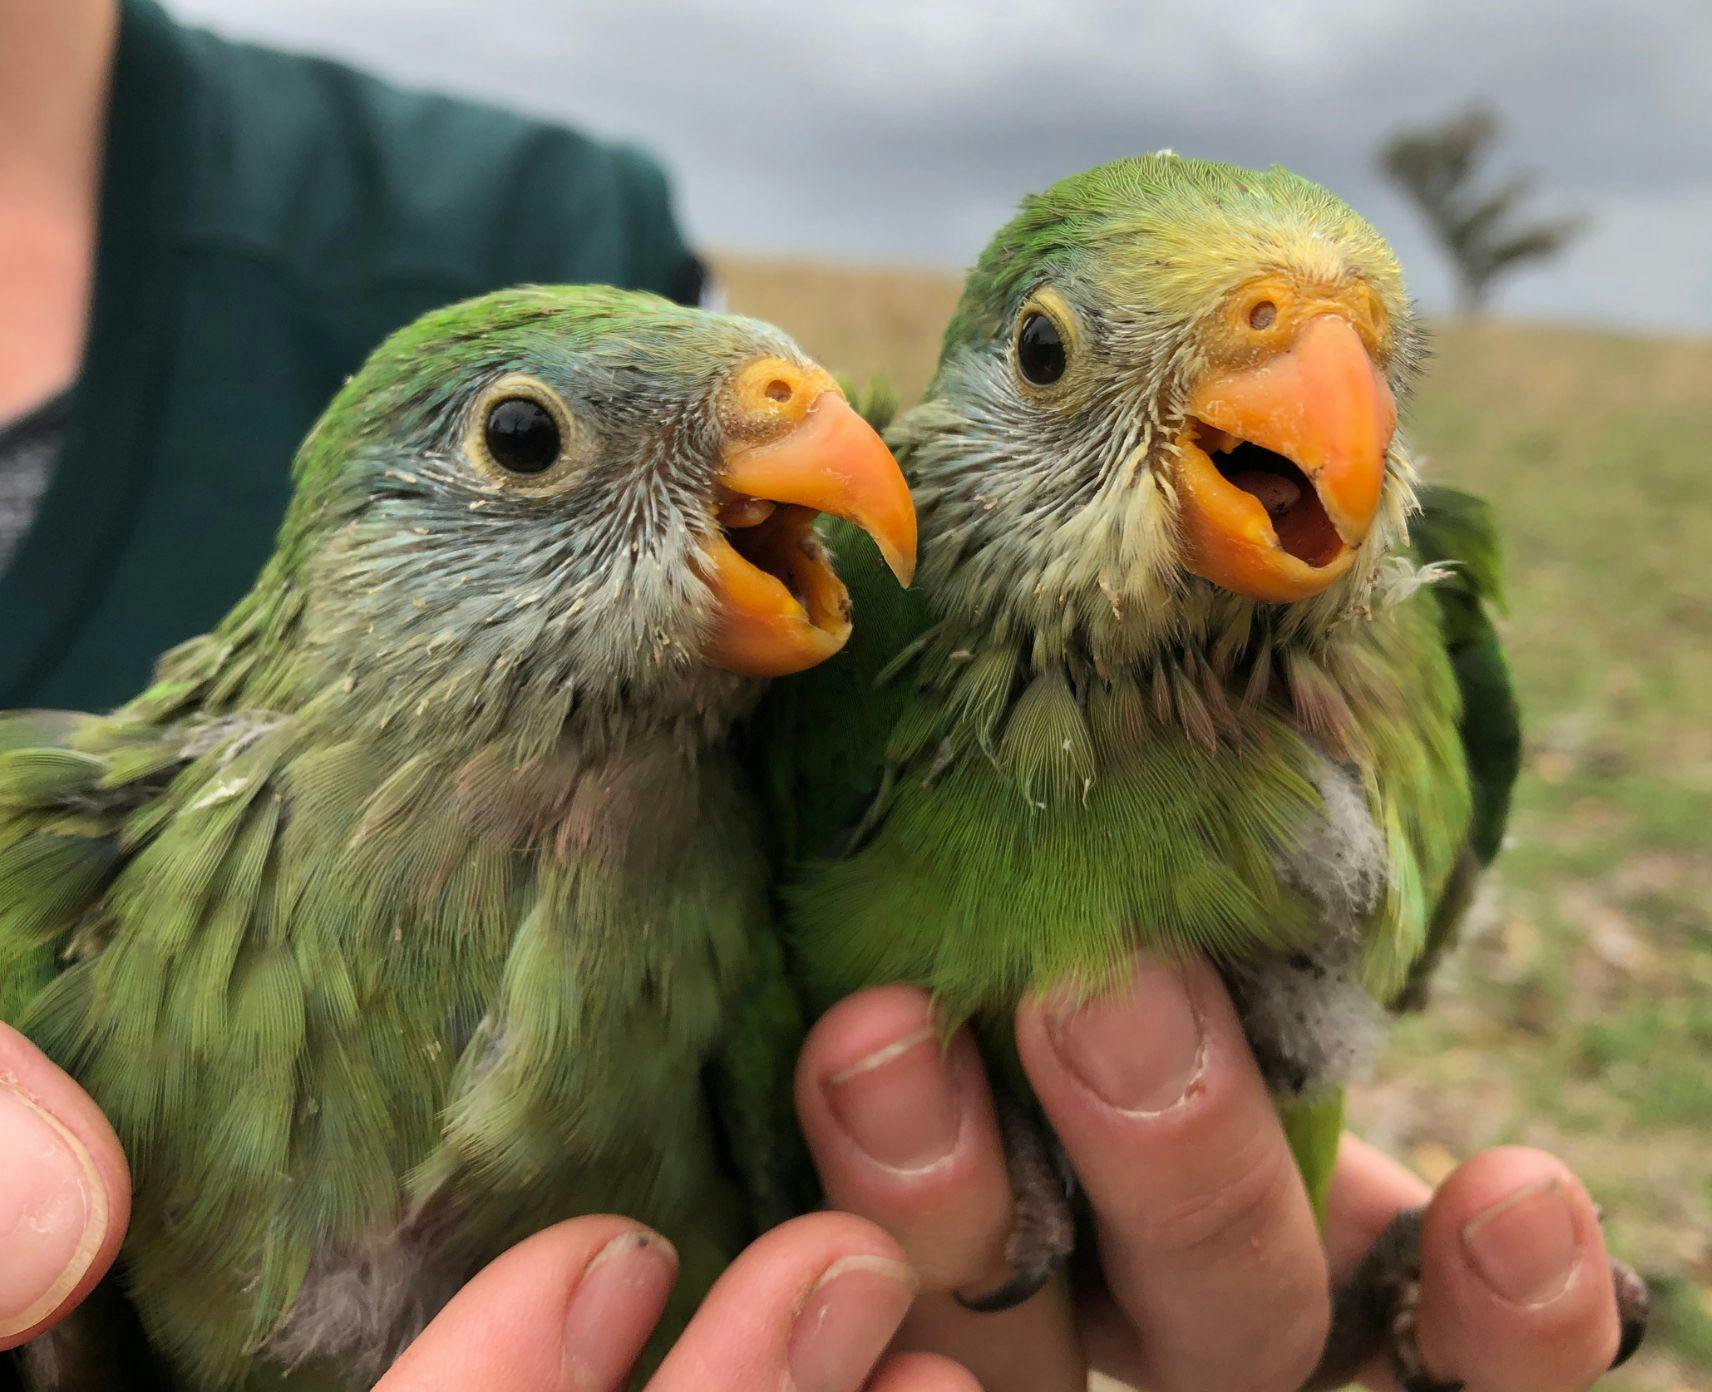 Close up of two superb parrots with green feathers and orange beaks